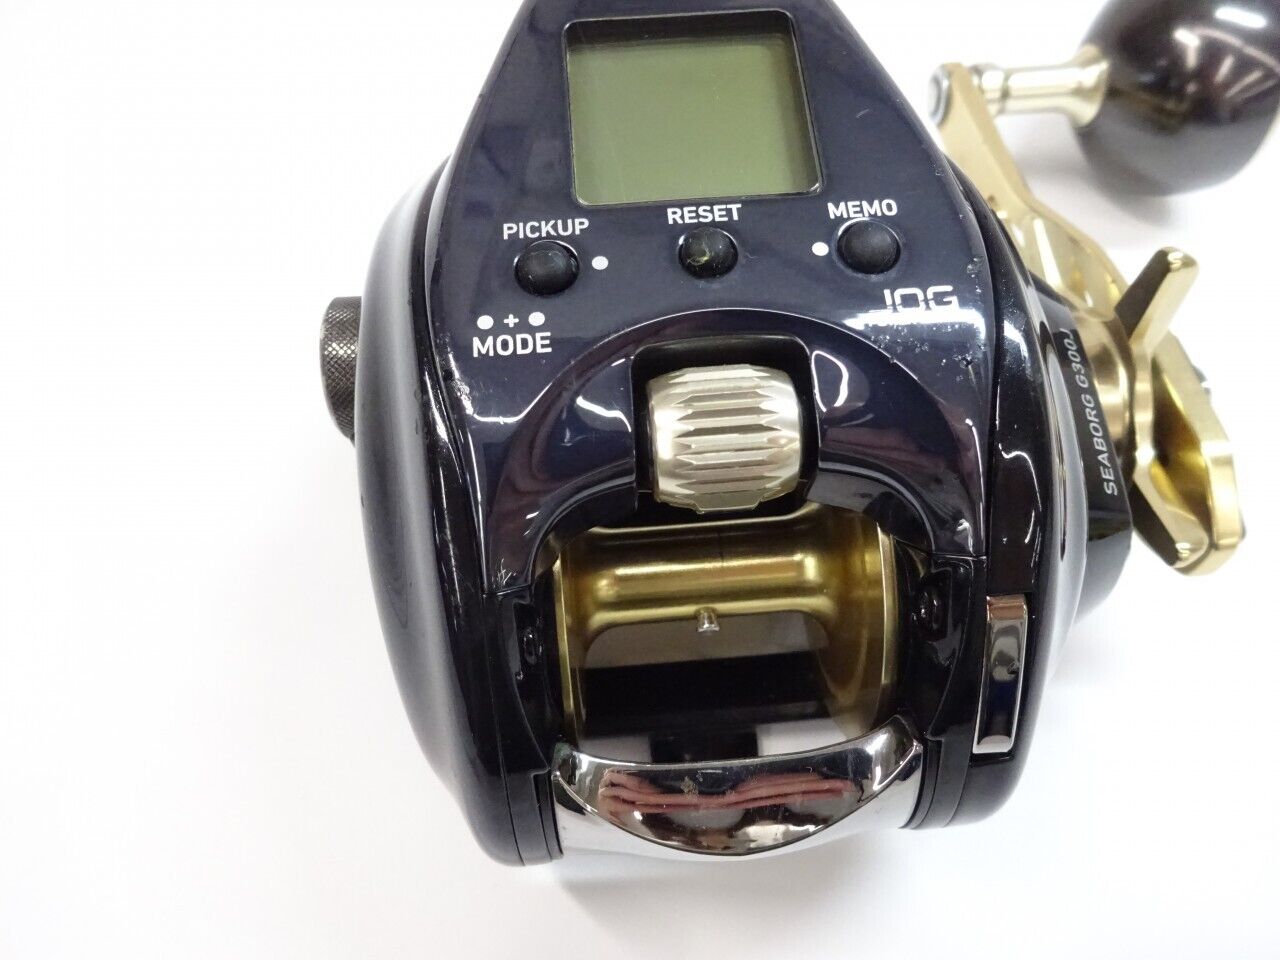 Daiwa Electric Reel 21 SEABORG G300J Right 575g Gear Ratio 6.0:1 F/S from Japan